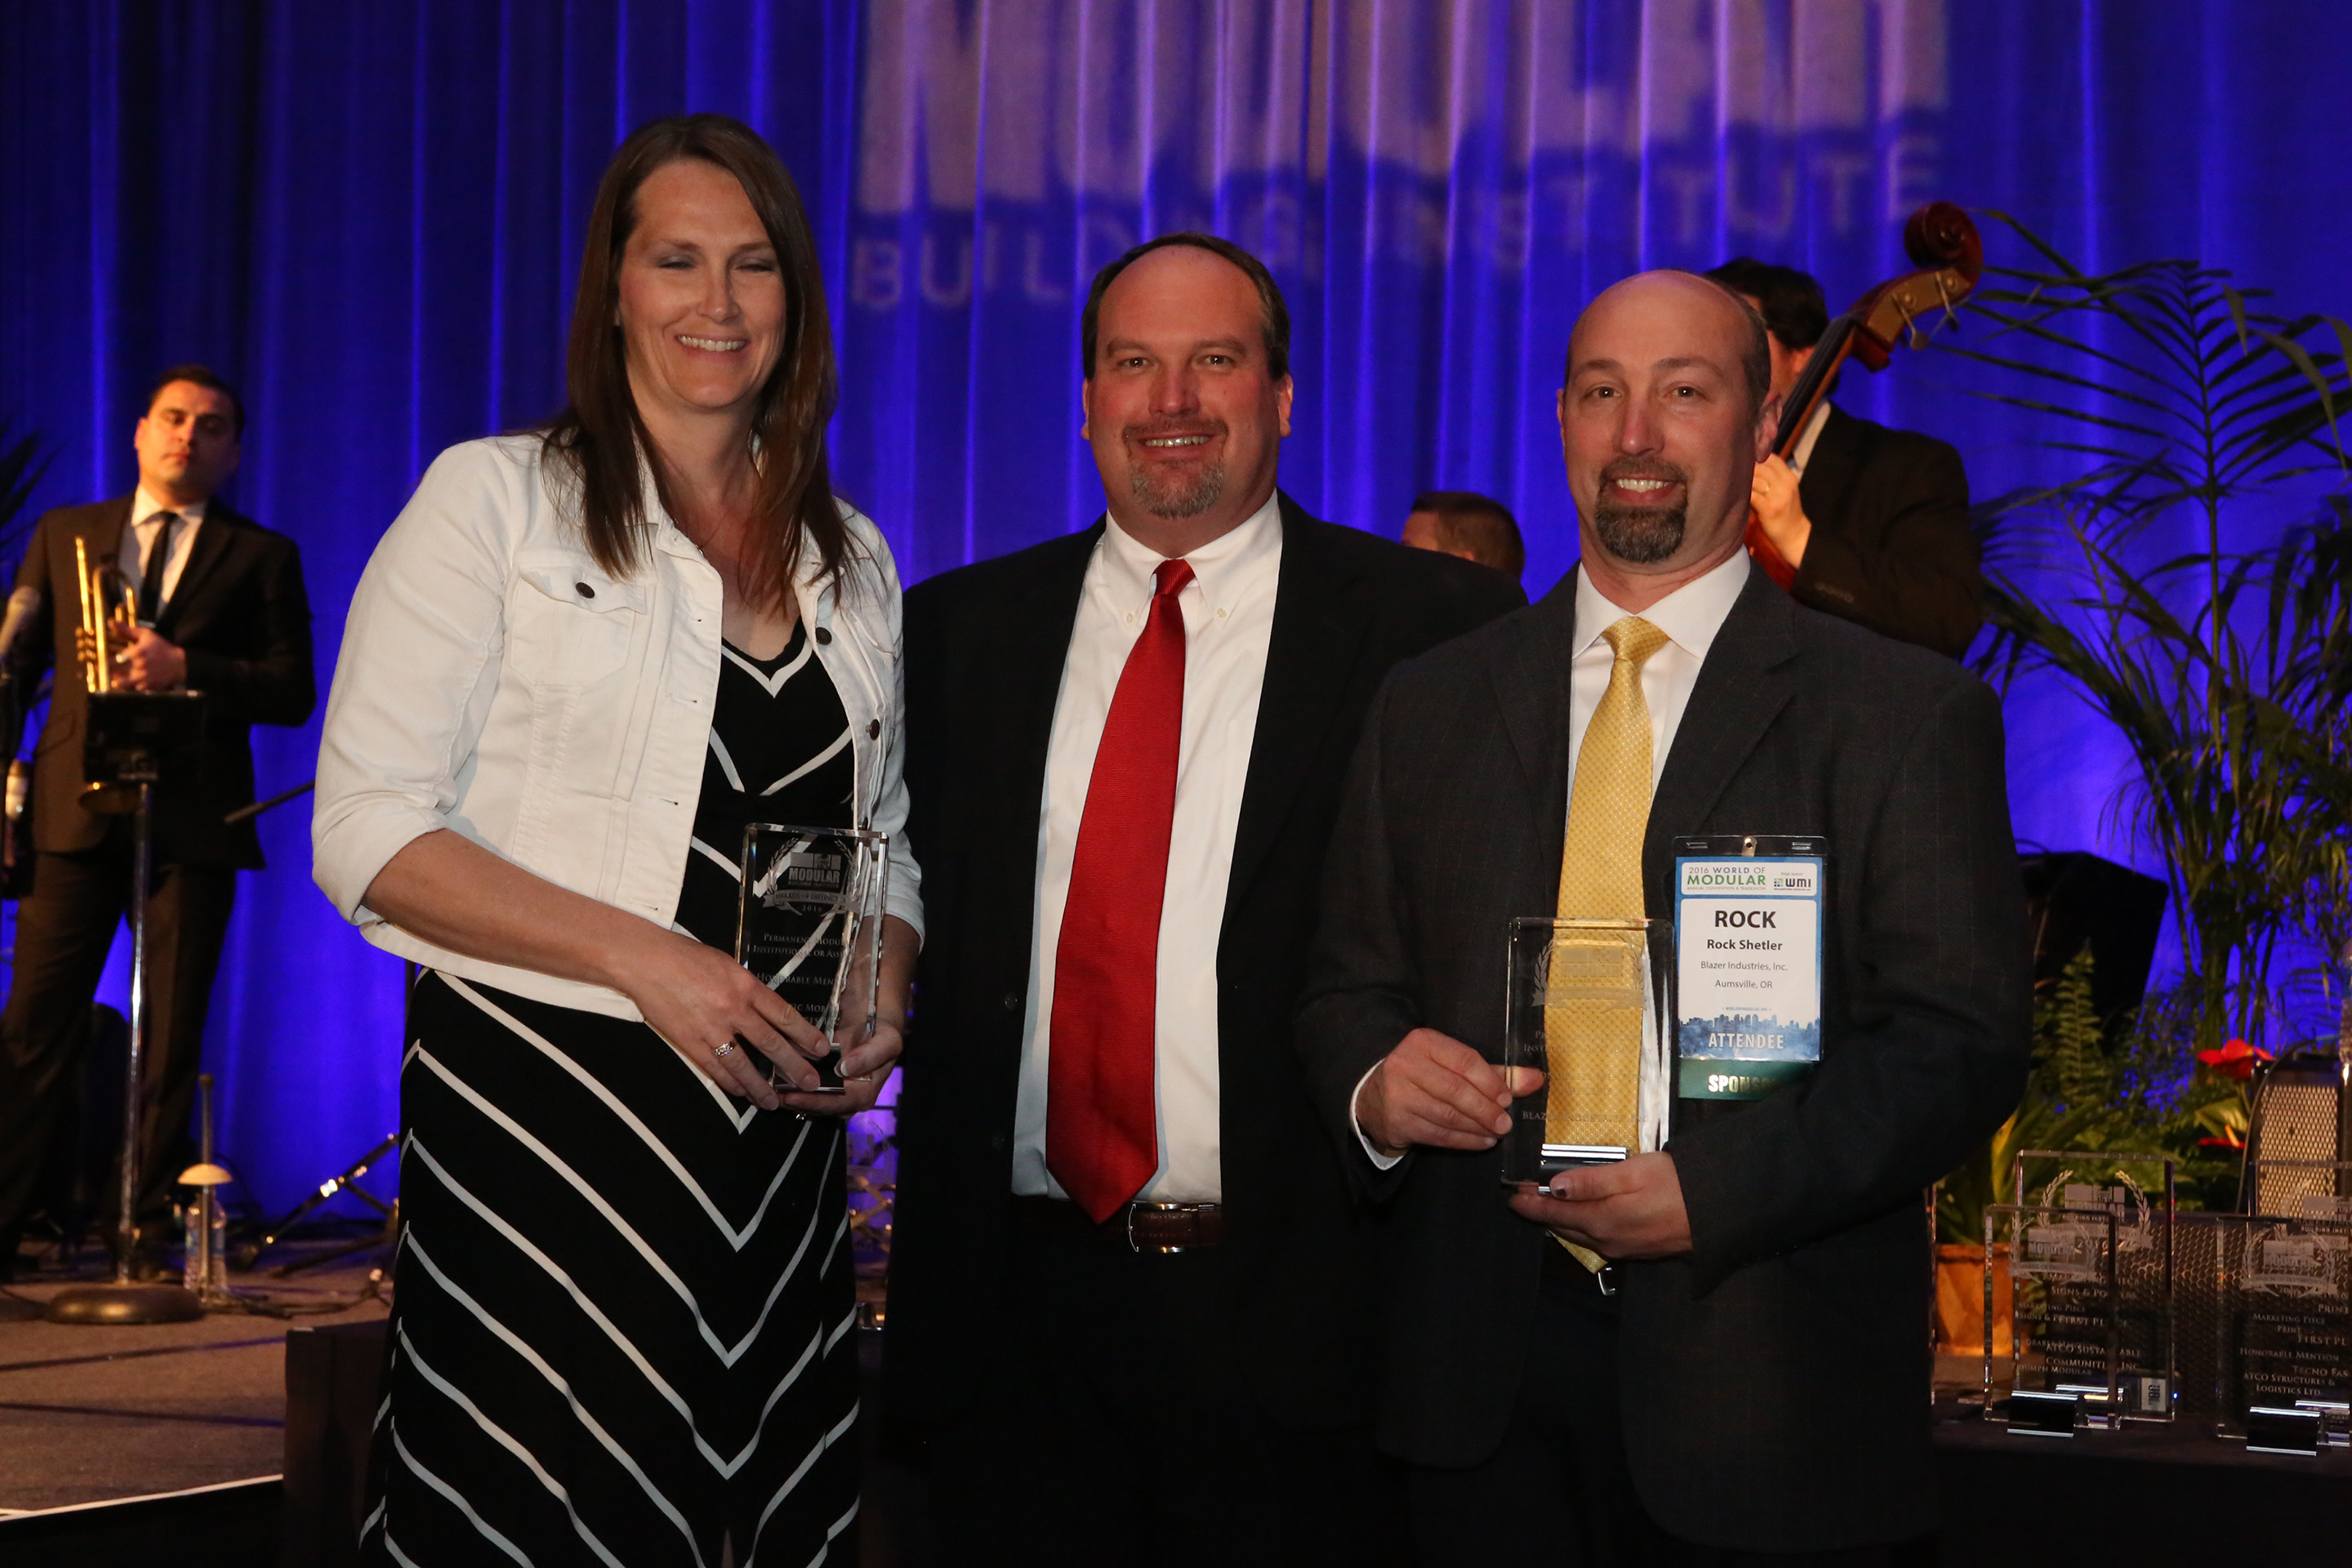 Gretchen Moore, CFO (left) accepts award, along with Manufacturer Rock Shetler (right) of Blazer Industries, Inc.Photo Courtesy: Modular Building Institute